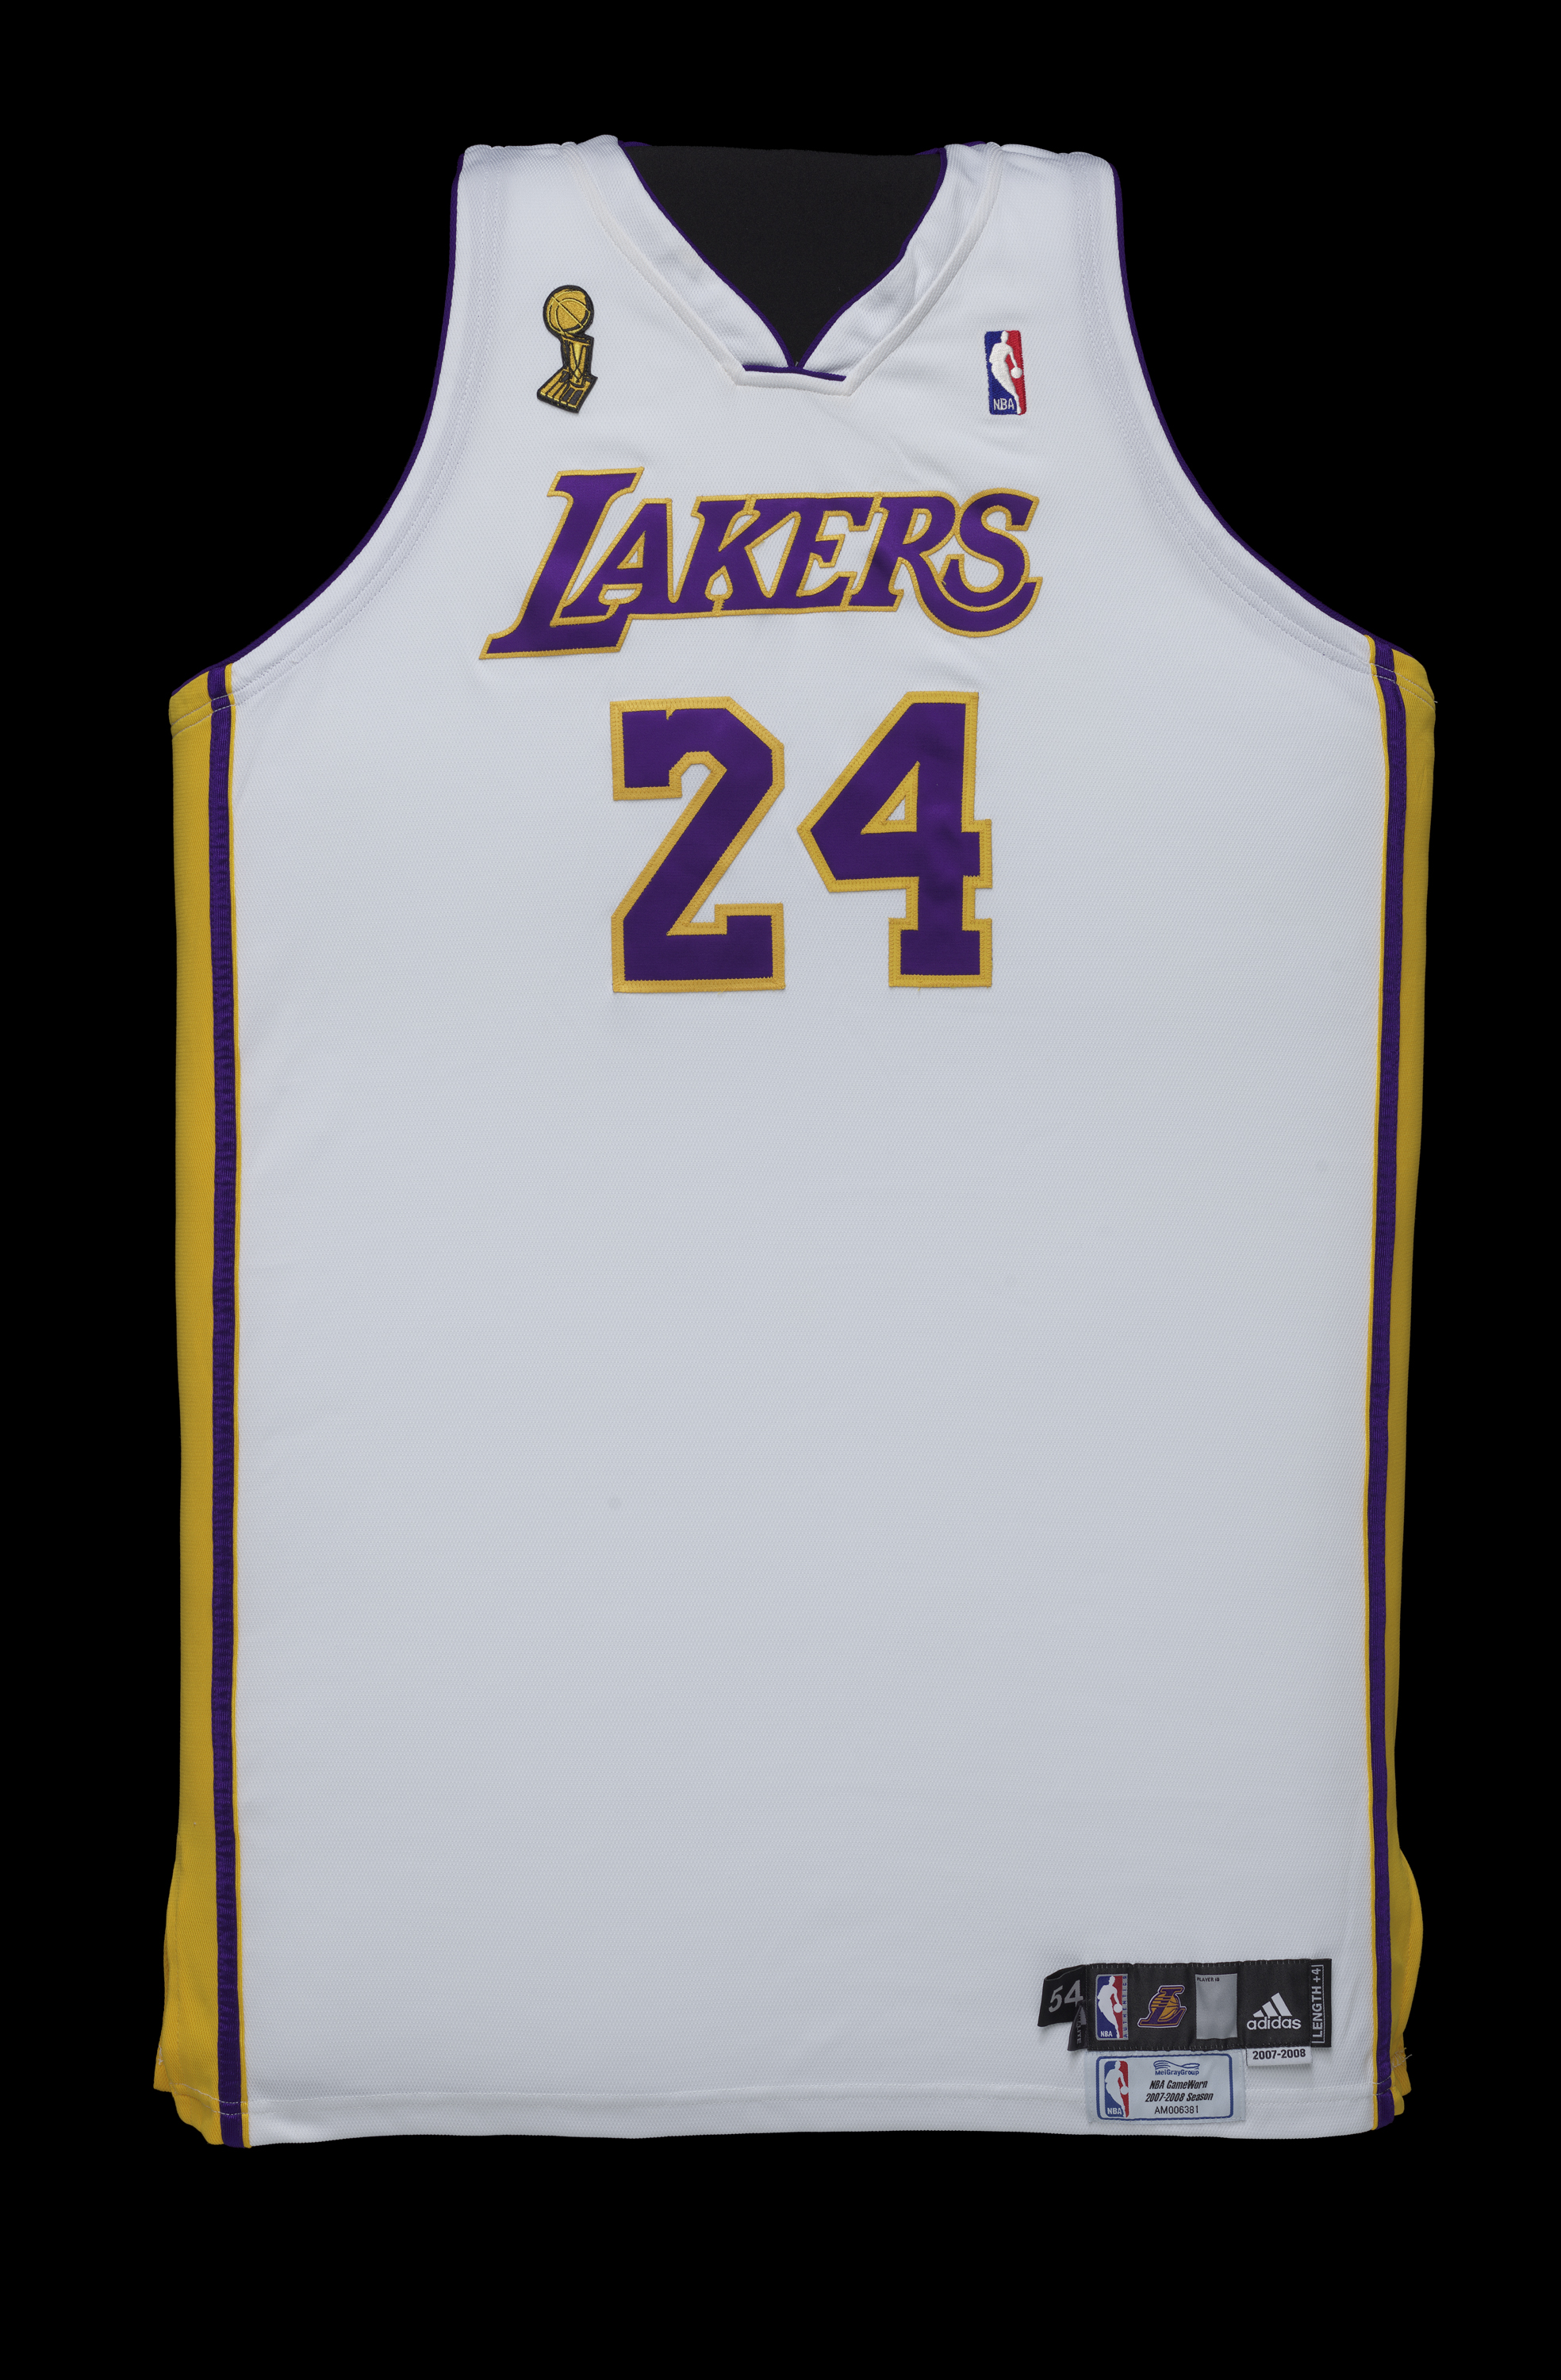 Honoring Kobe Bryant  National Museum of African American History and  Culture